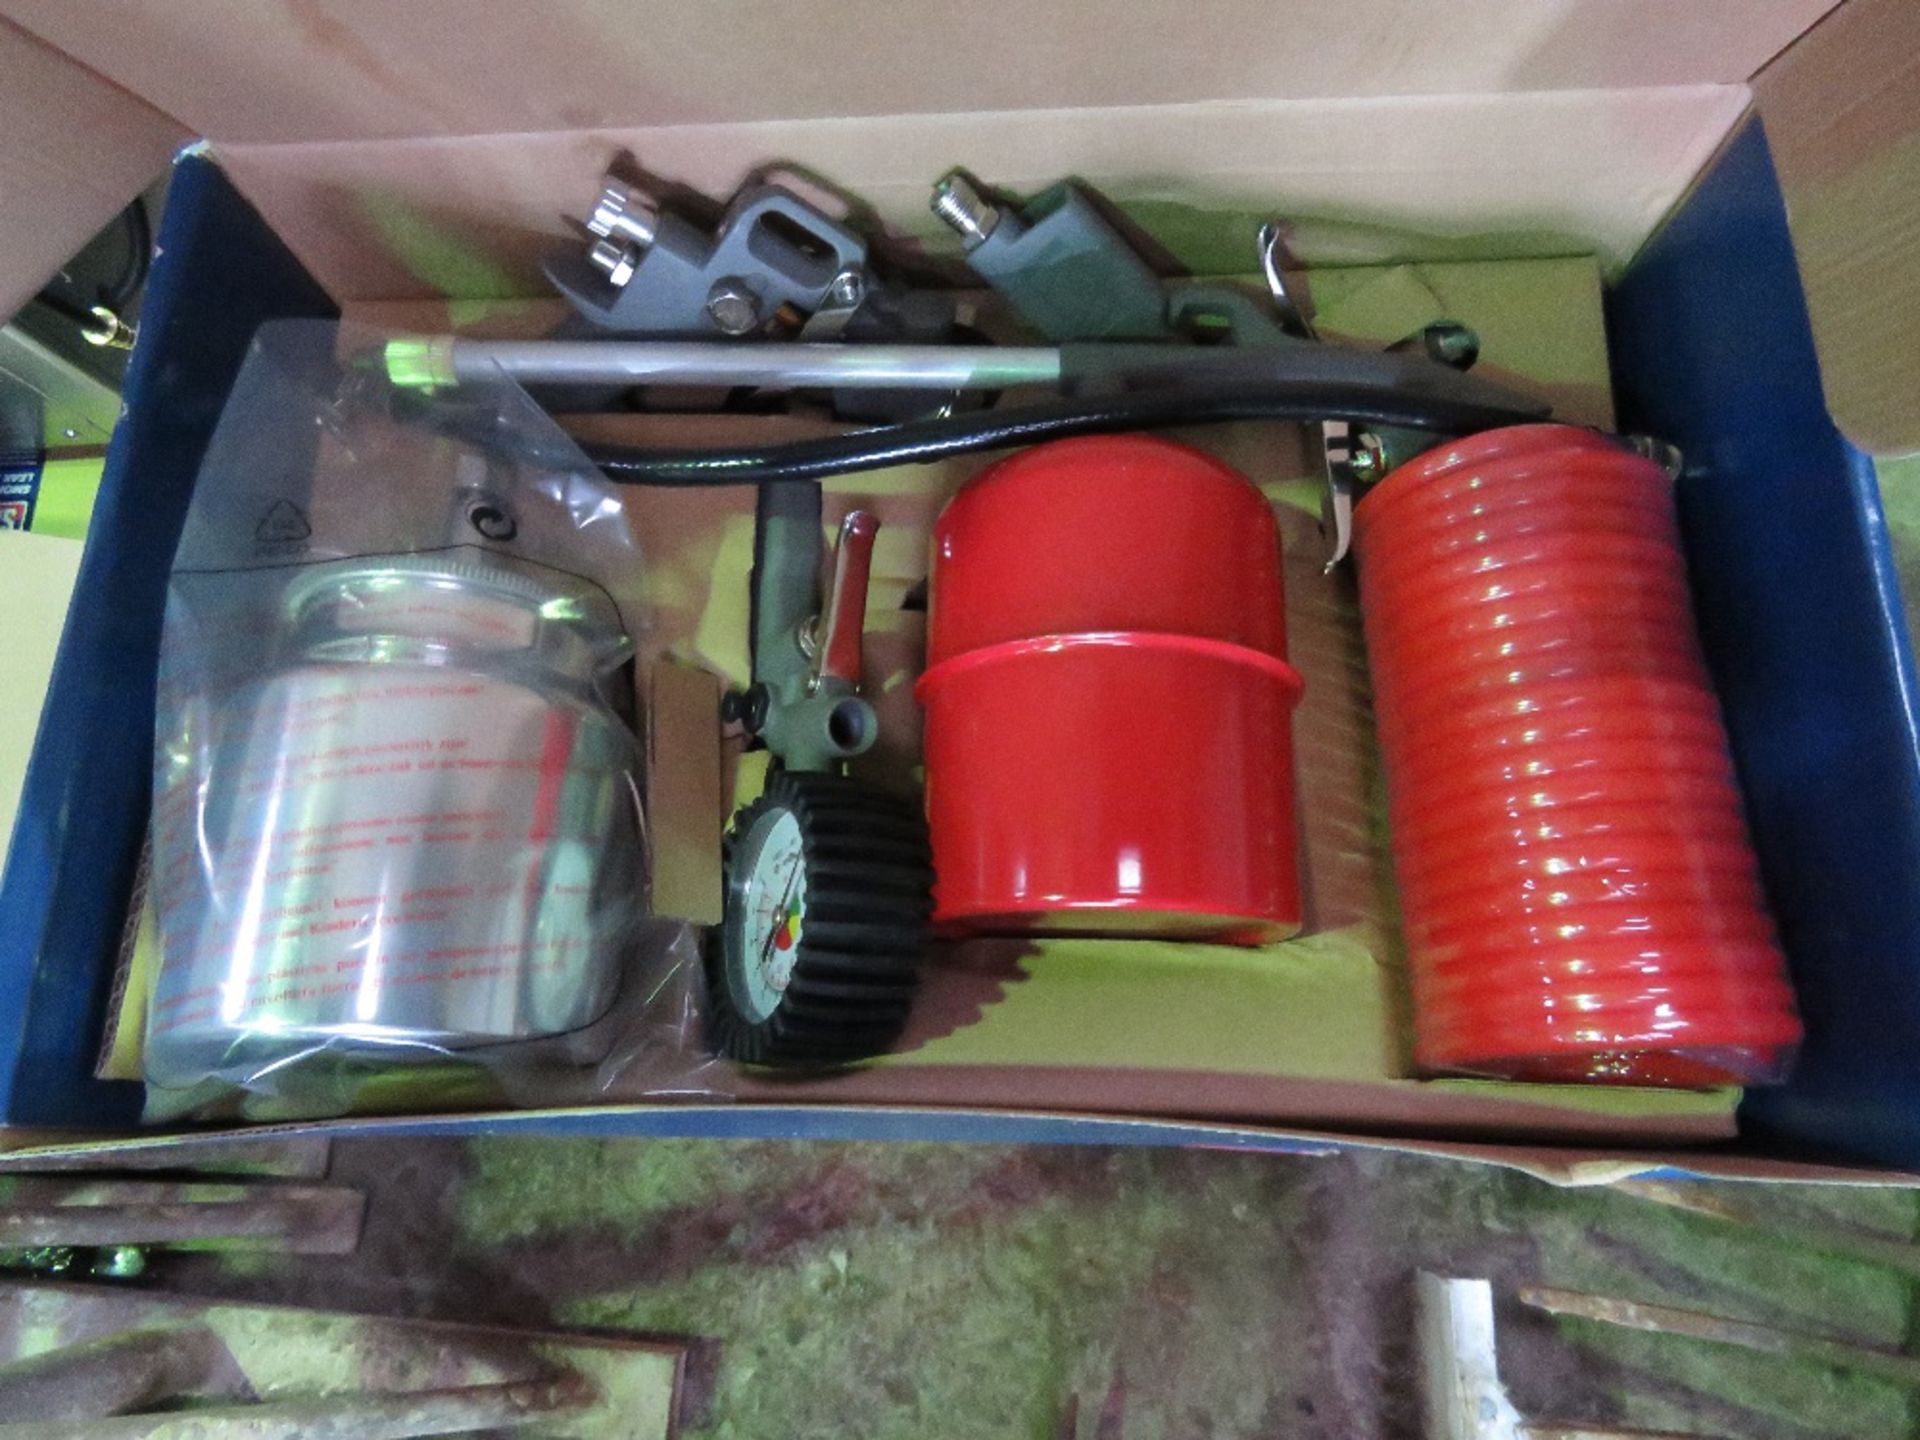 5 X SEALEY 5 PIECE AIR TOOL SETS. BOXED, UNUSED, DIRECT FROM LOCAL COMPANY BEING SURPLUS STOCK. - Image 4 of 4